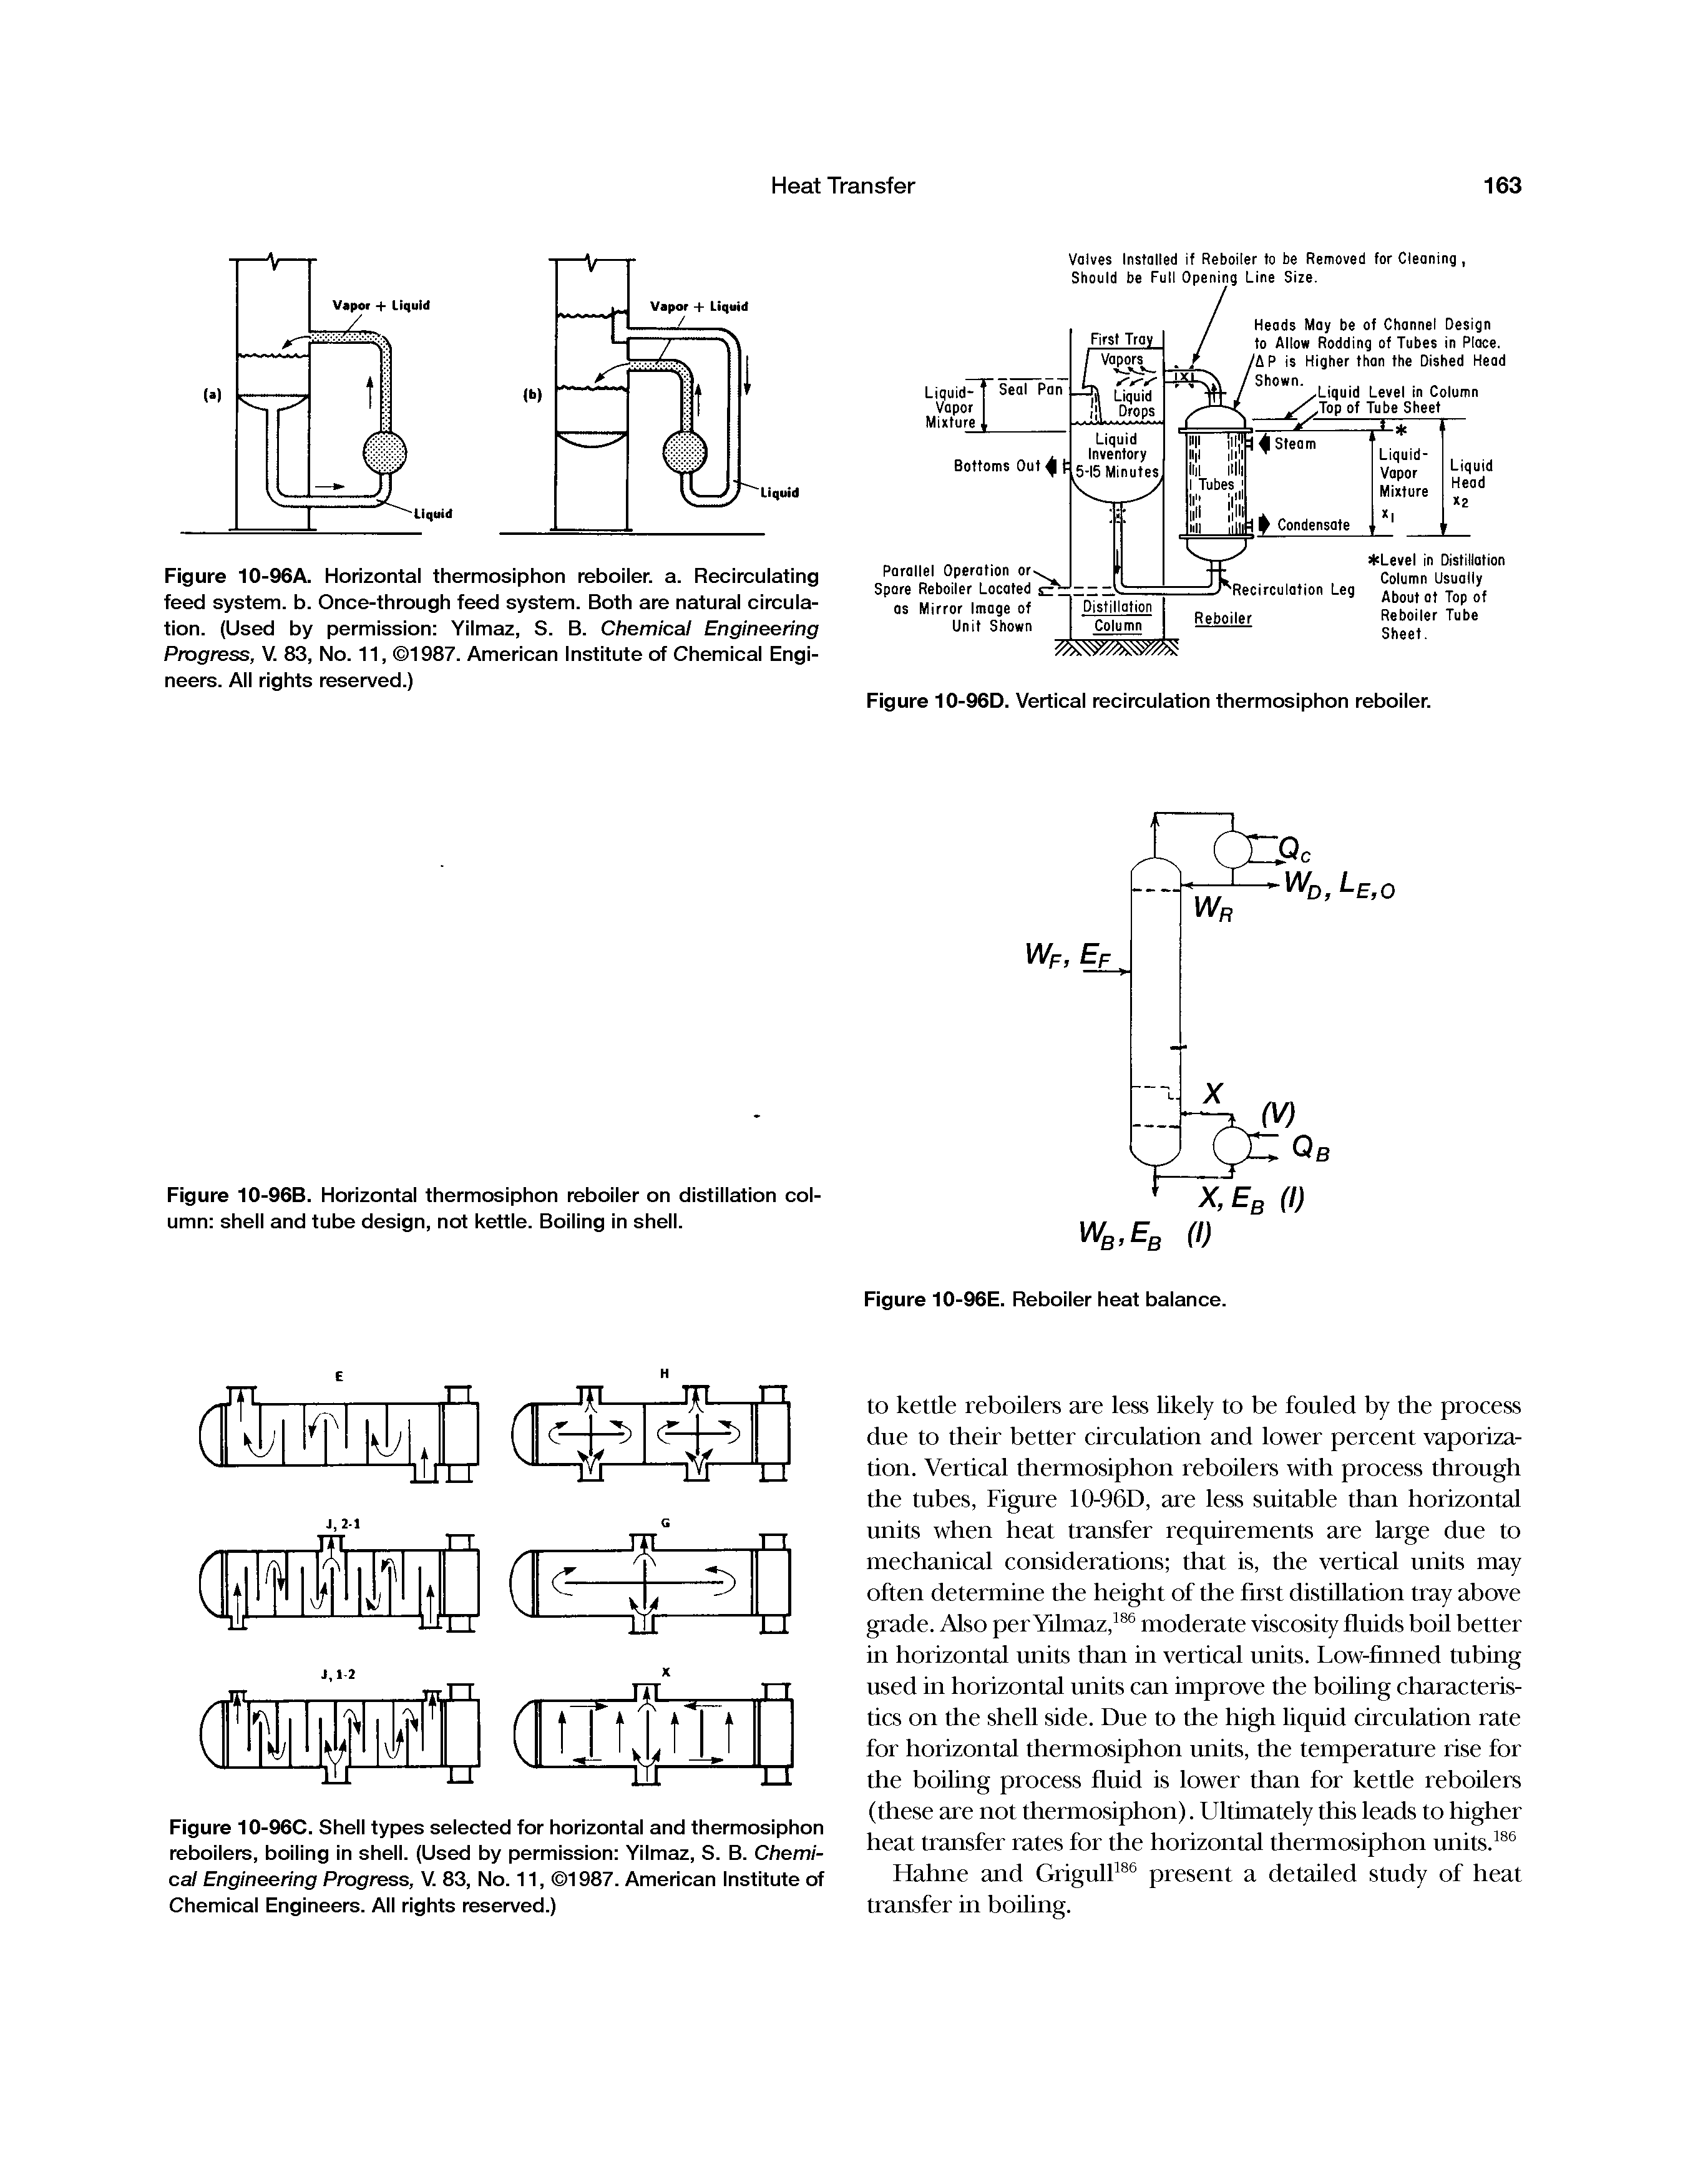 Figure 10-96B. Horizontal thermosiphon reboiler on distillation column shell and tube design, not kettle. Boiling in shell.